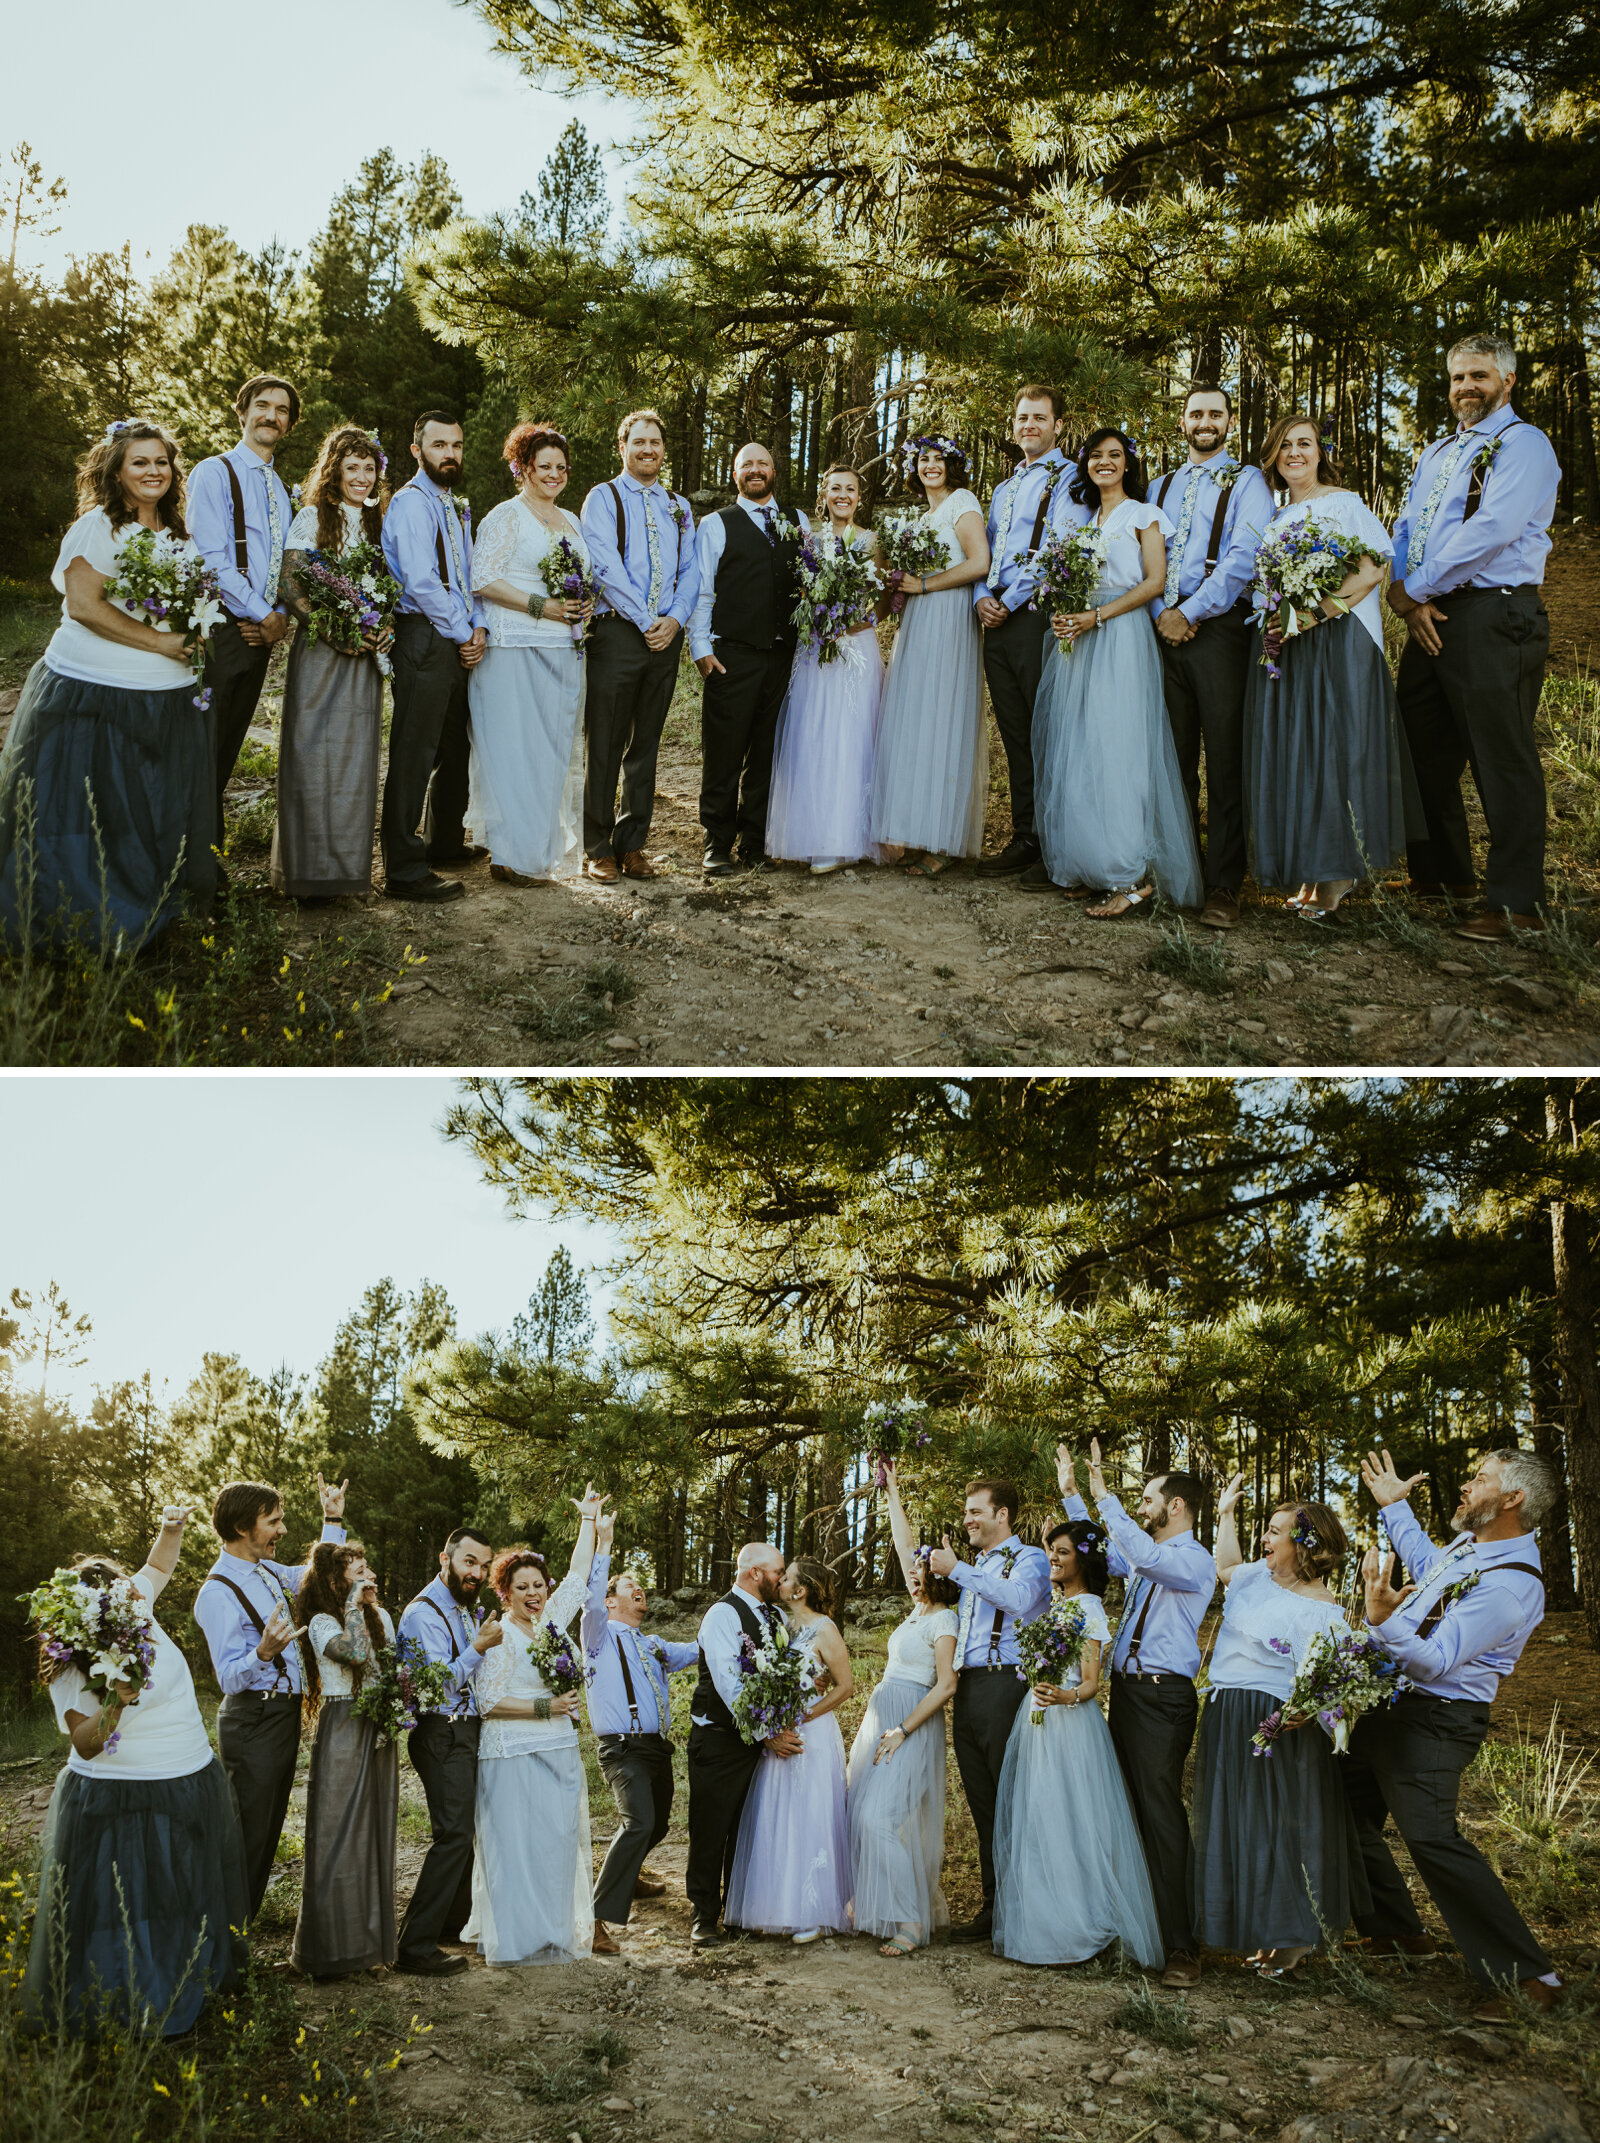 full wedding party photos in flagstaff arizona with bridesmaids and groomsmen cheering on the bride and groom.jpg